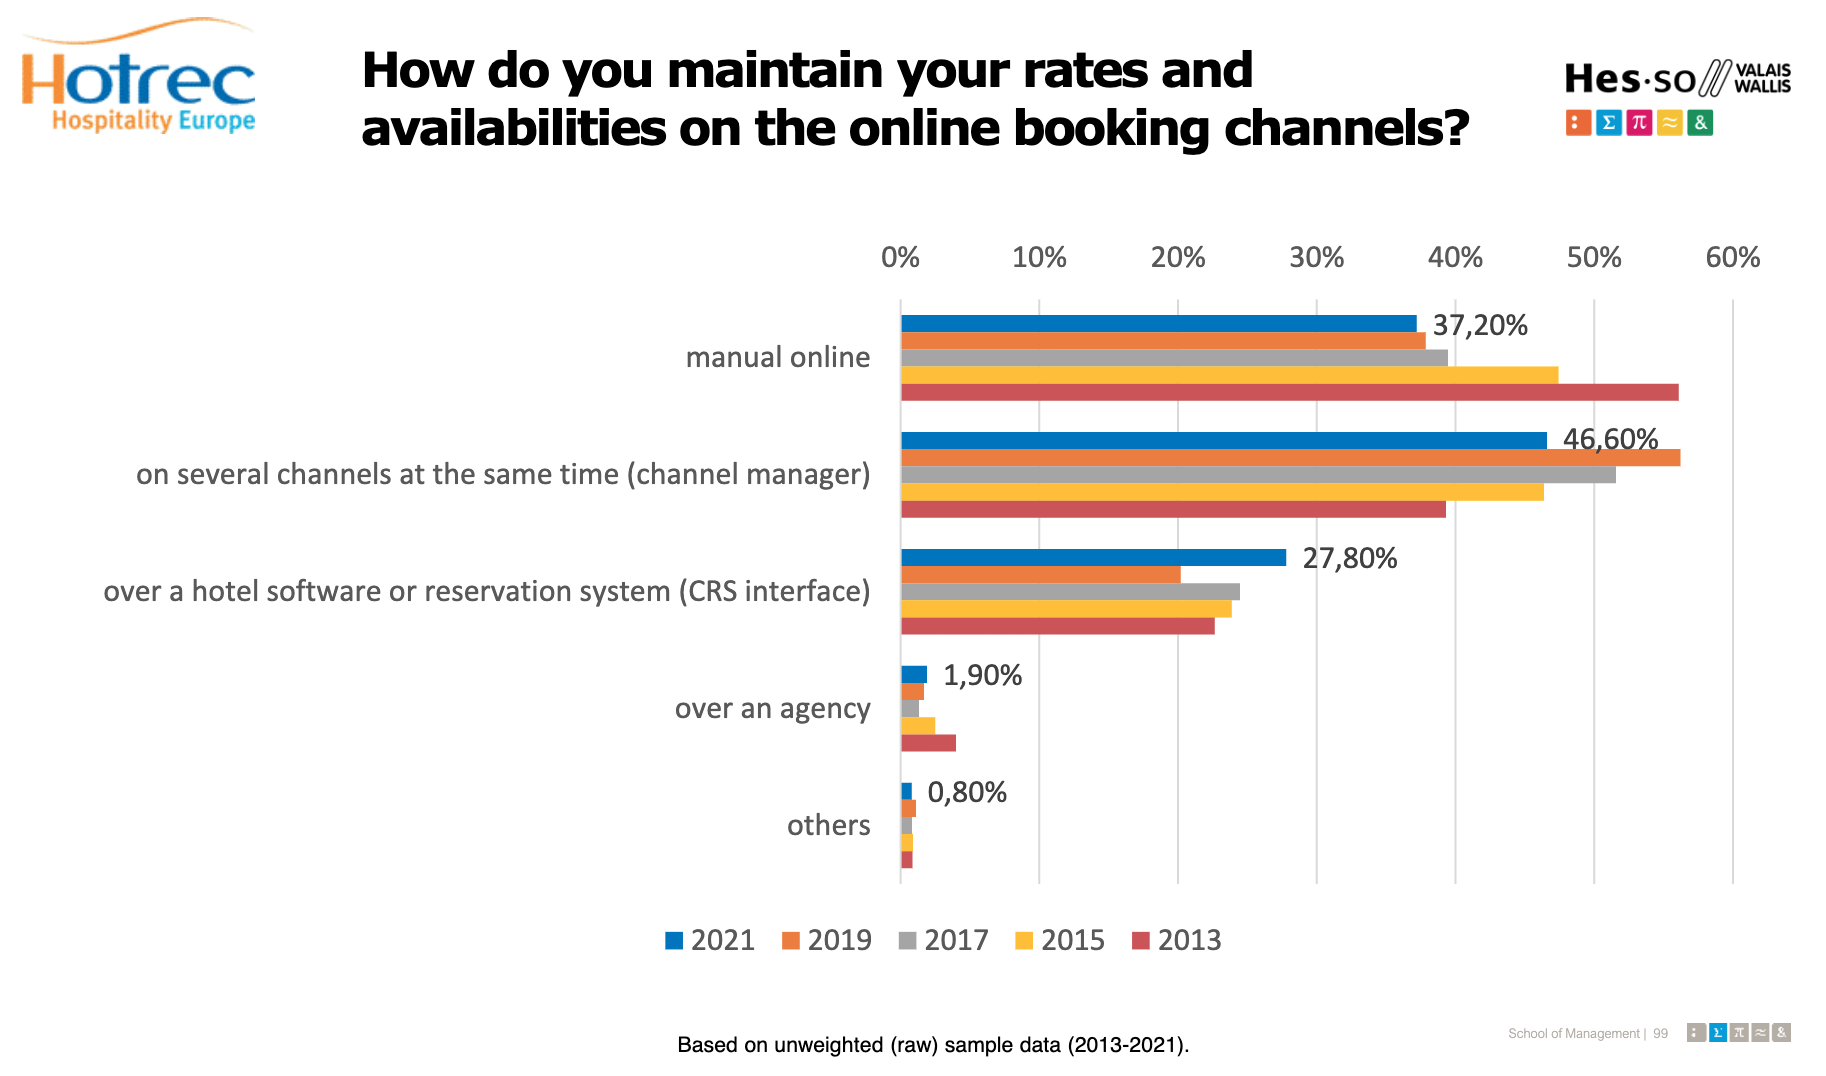 How do you maintain your rates and availabilities on the online booking channels?